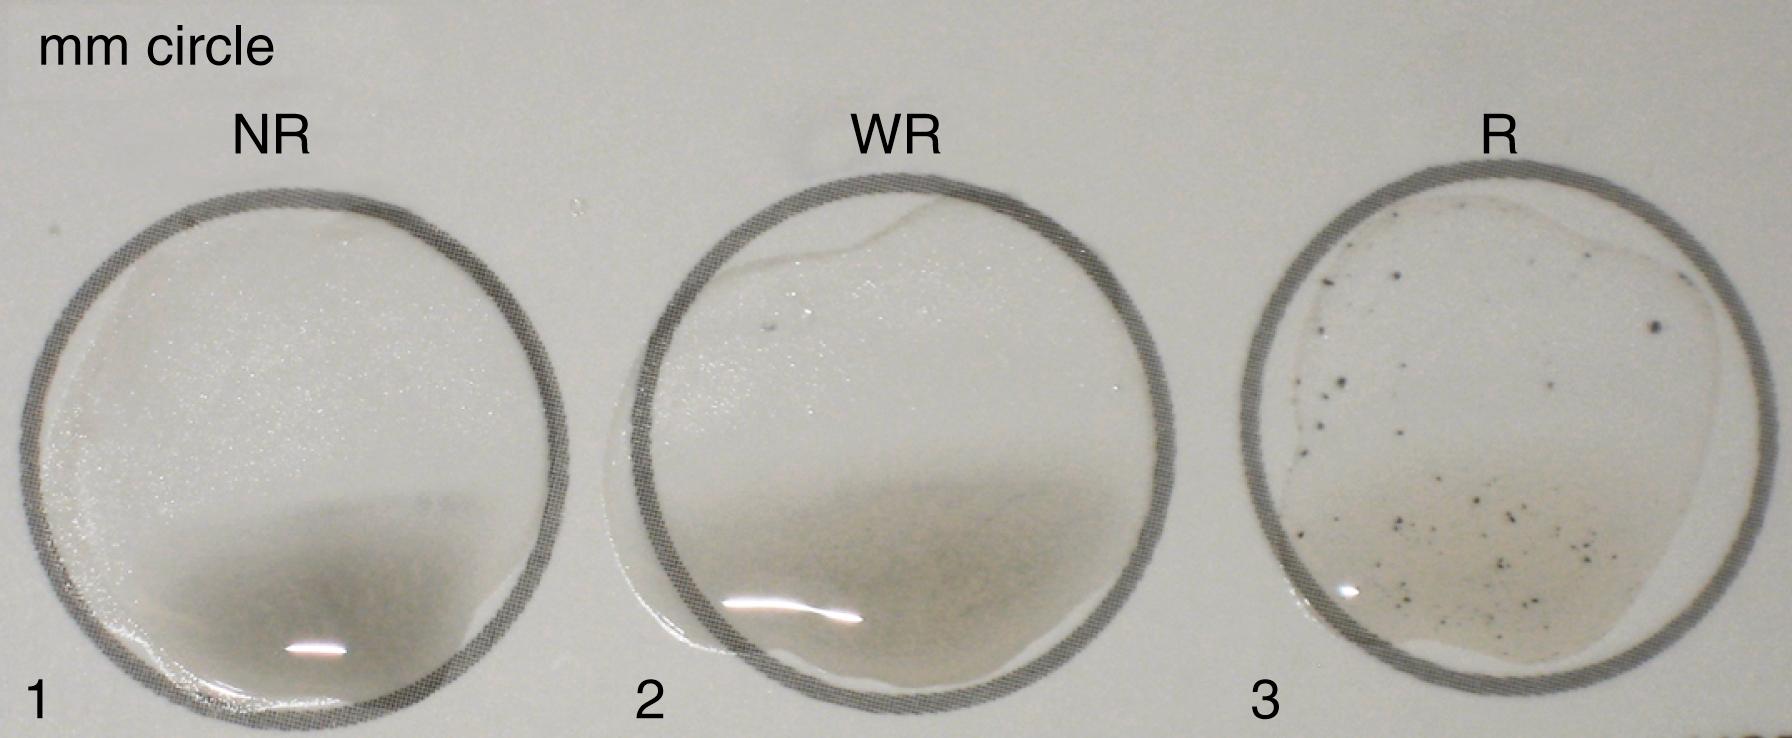 Fig. 61.6, Rapid plasmin reagin test card showing nonreactive, weakly reactive, and strongly reactive serum samples (wells 1 to 3) with their respective agglutination patterns.